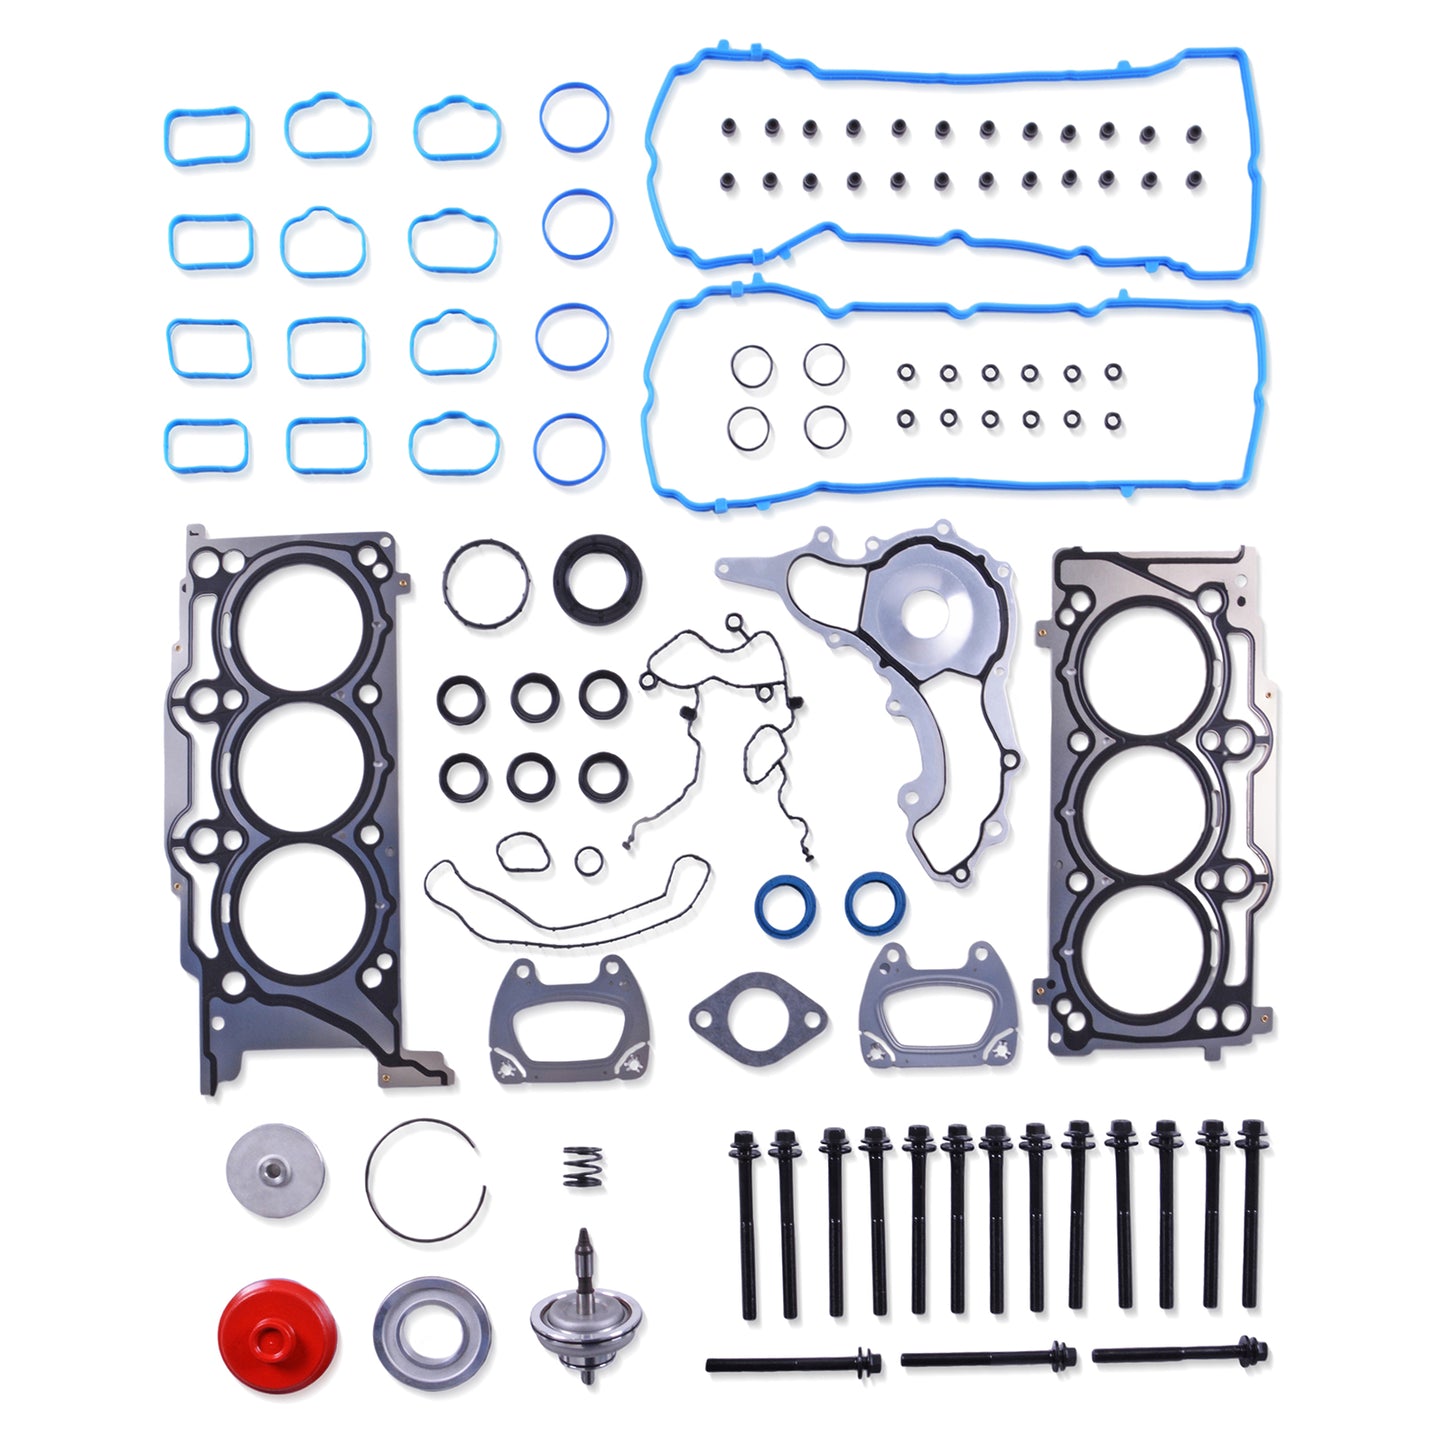 GOCPB Engine Head Gaskets with Bolts Set HS26541PT Replacement for 2011-2016 Chrysler 300 Jeep Wrangler Dodge Charger Challenger Ram 1500 3.6L ES72467